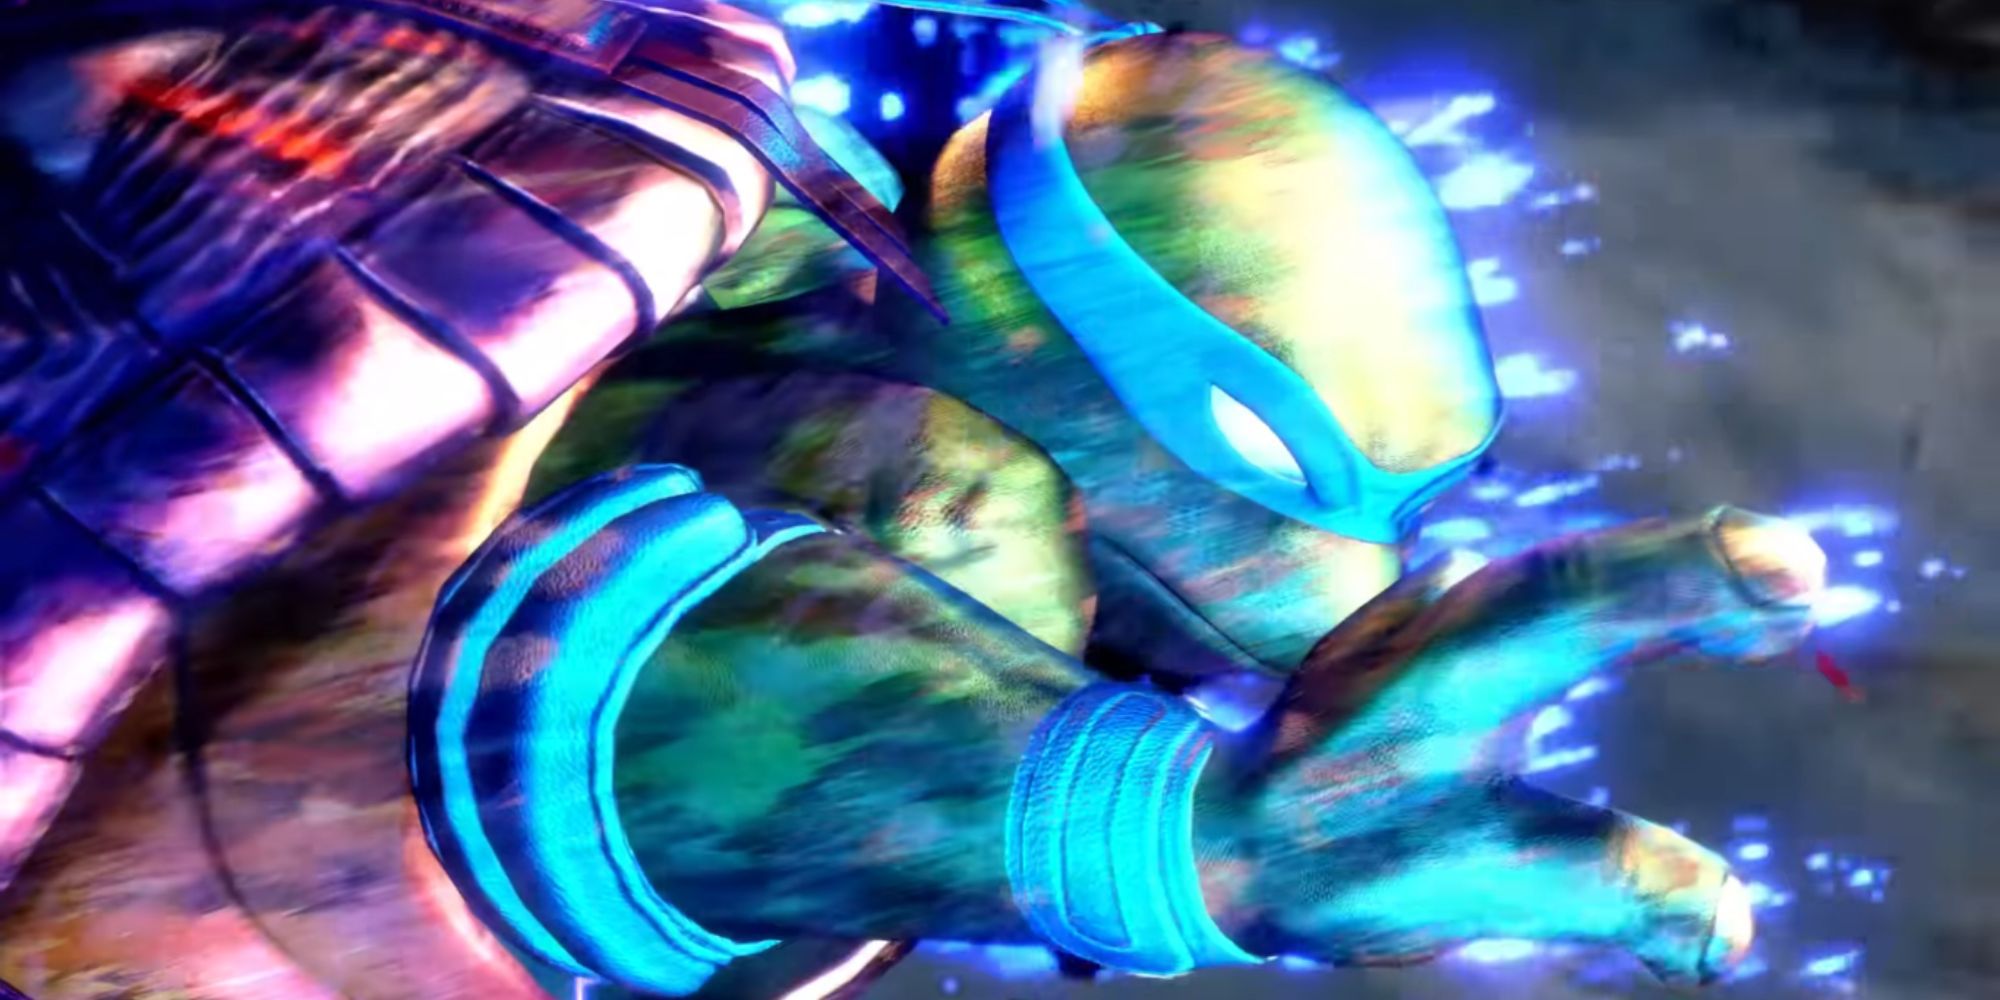 Leonardo powers up during a fight